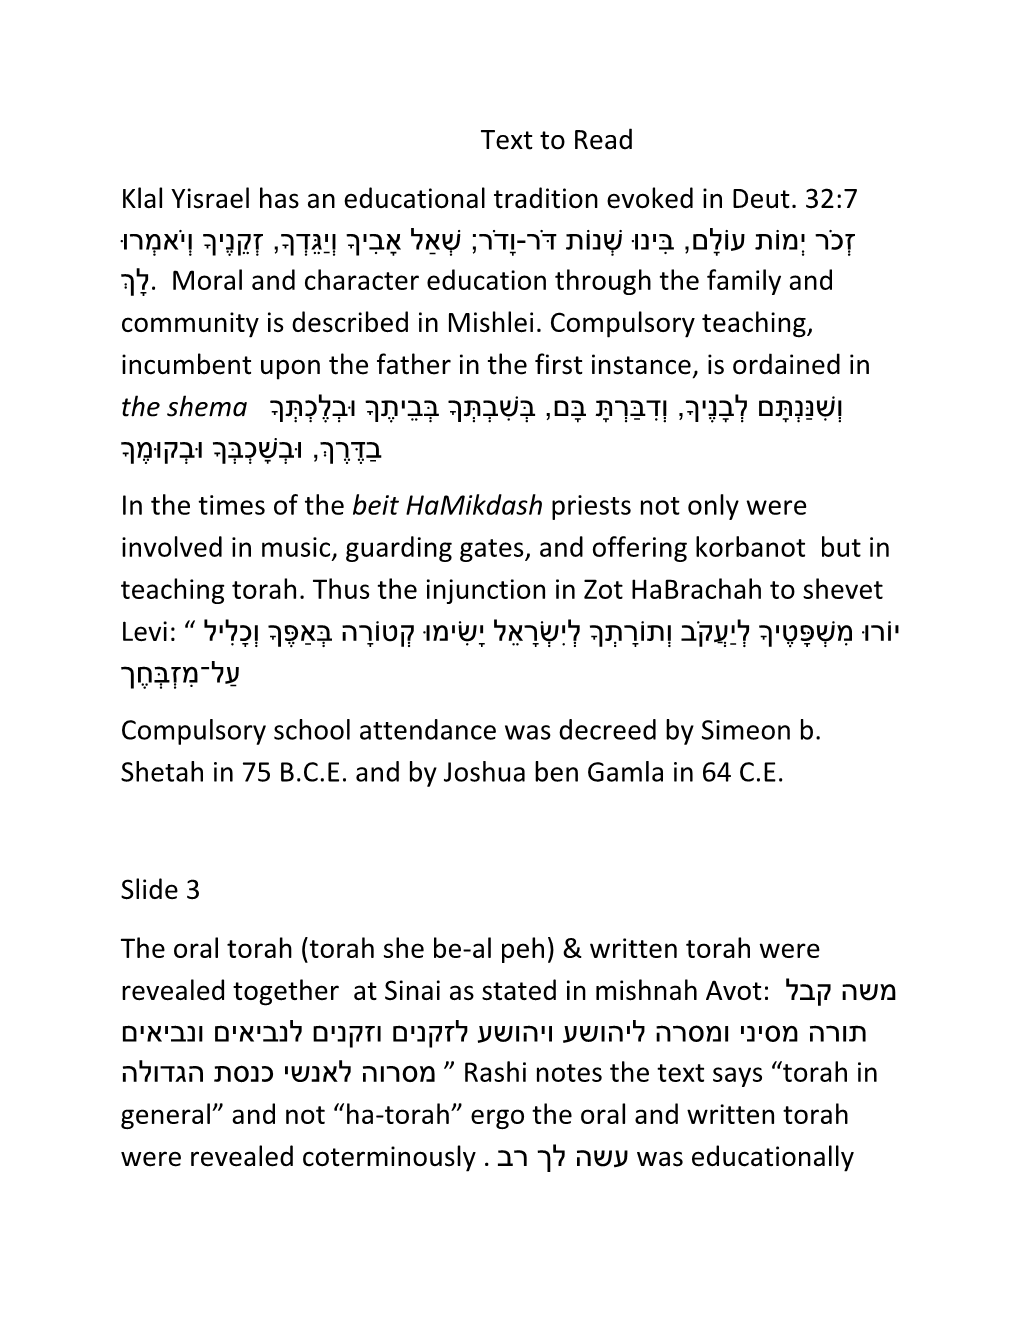 Text to Read Klal Yisrael Has an Educational Tradition Evoked in Deut